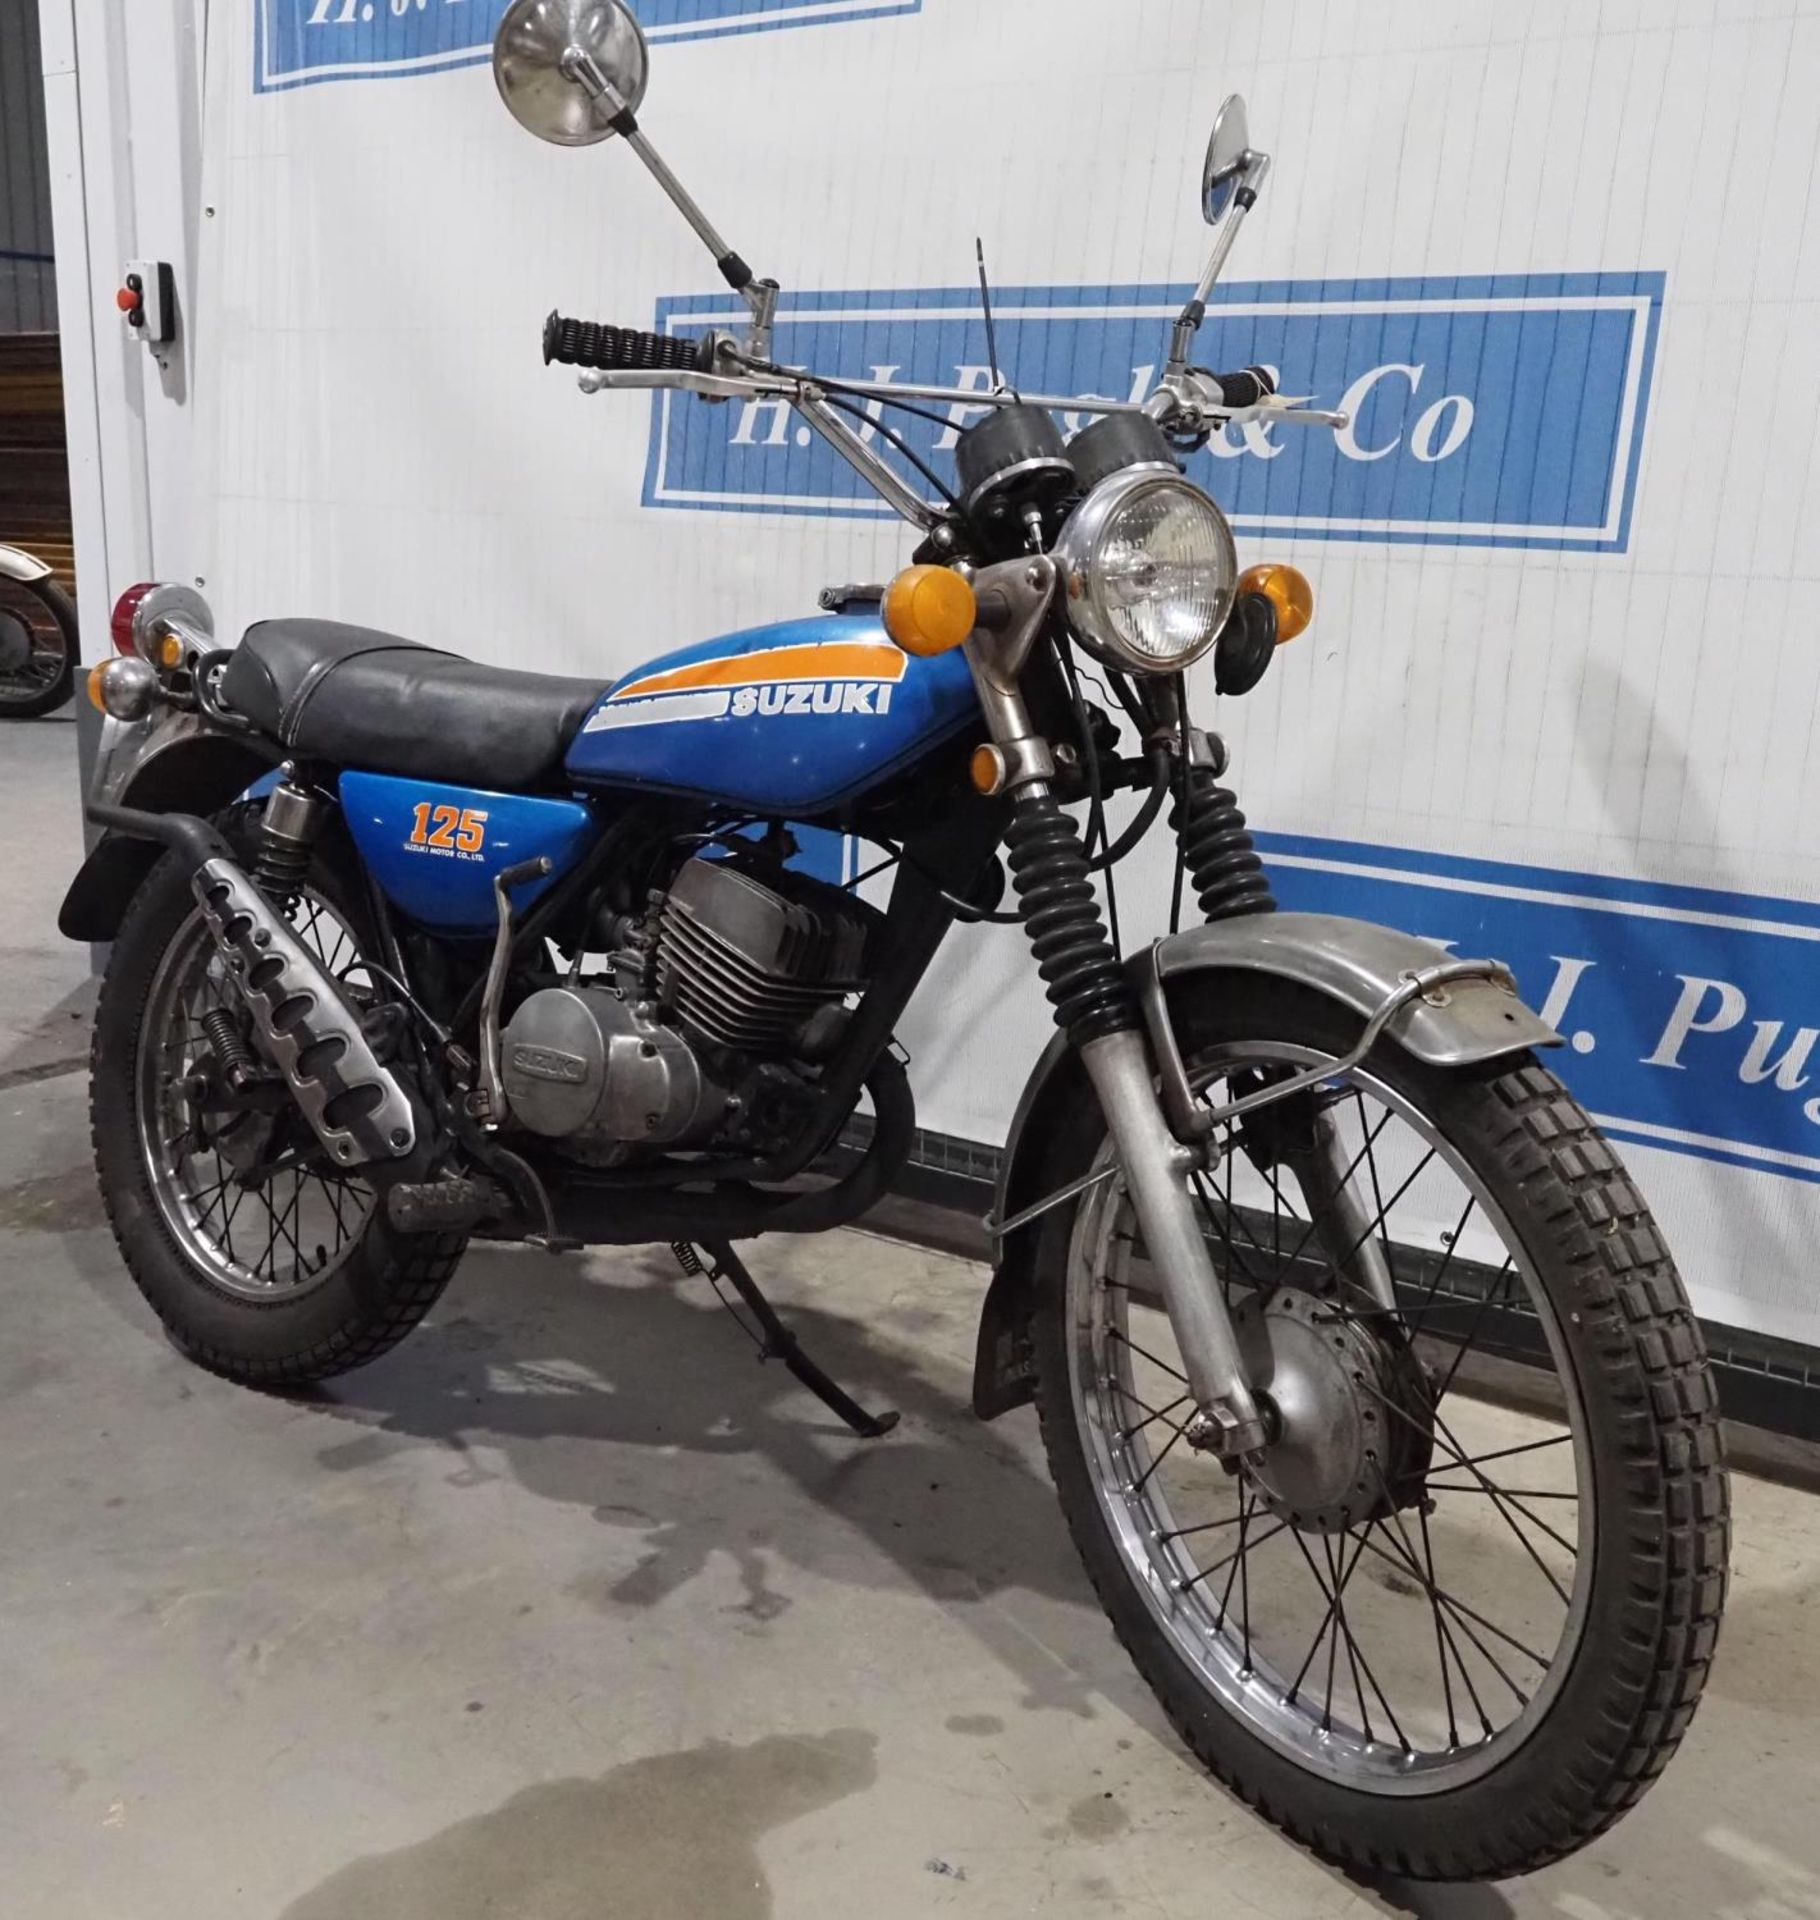 Suzuki TS125 motorcycle. 123cc. 1974. Good runner, used regularly but not recently. Reg. BWP 891M. - Image 2 of 6